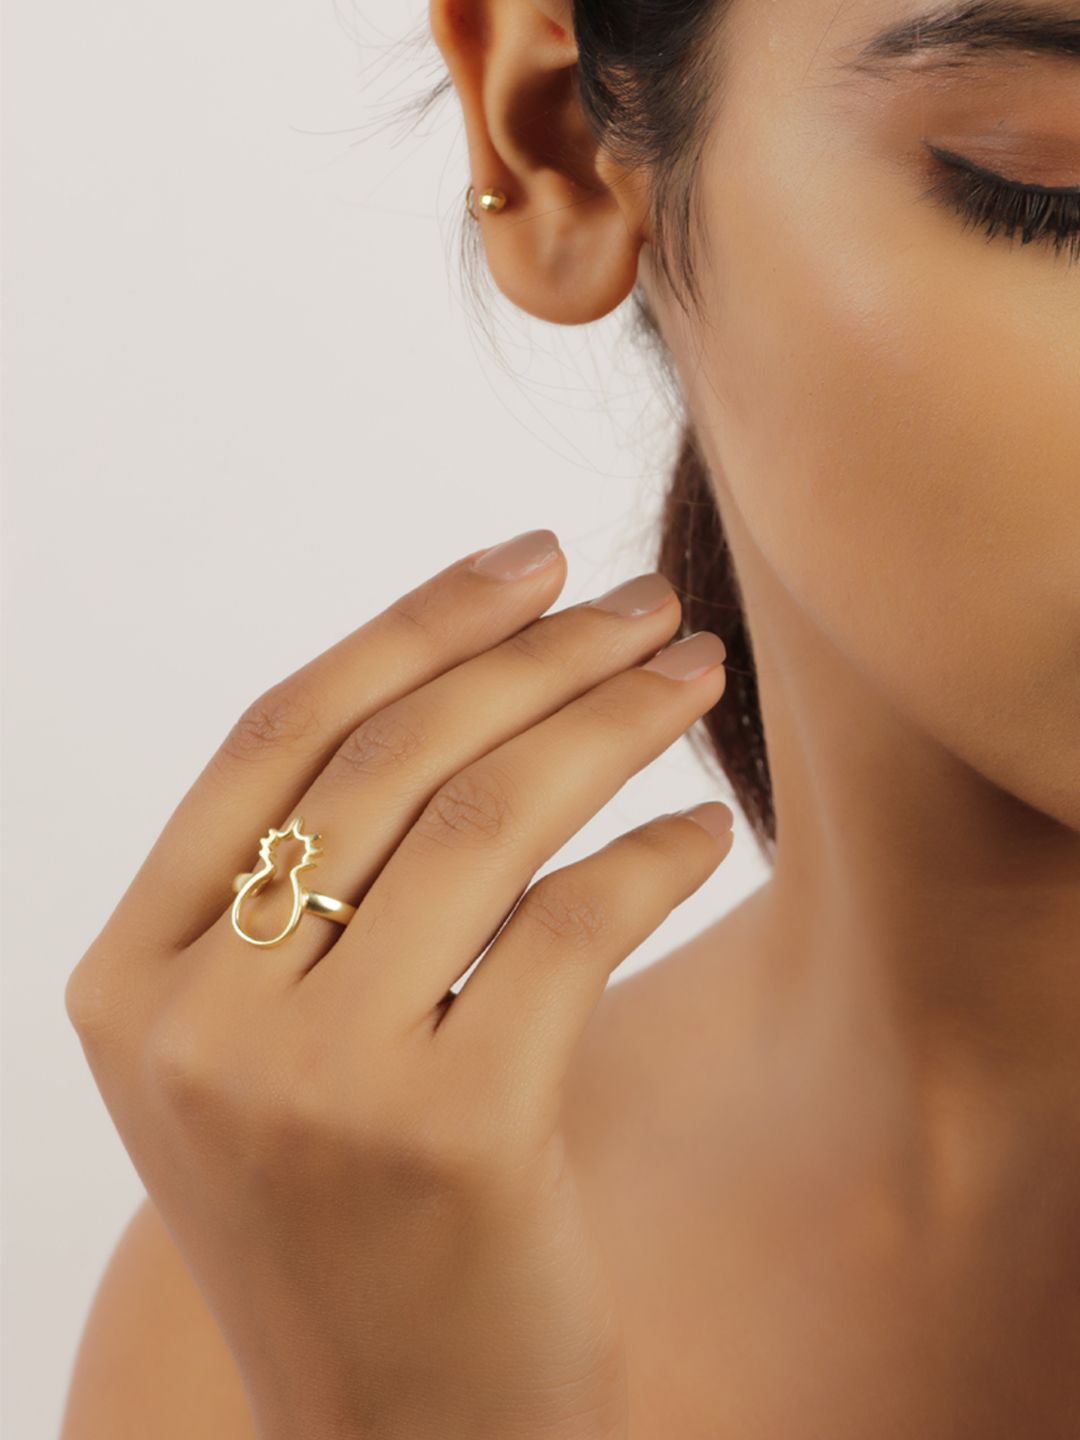 STILSKII Unisex Gold-Plated Adjustable Finger Ring Price in India